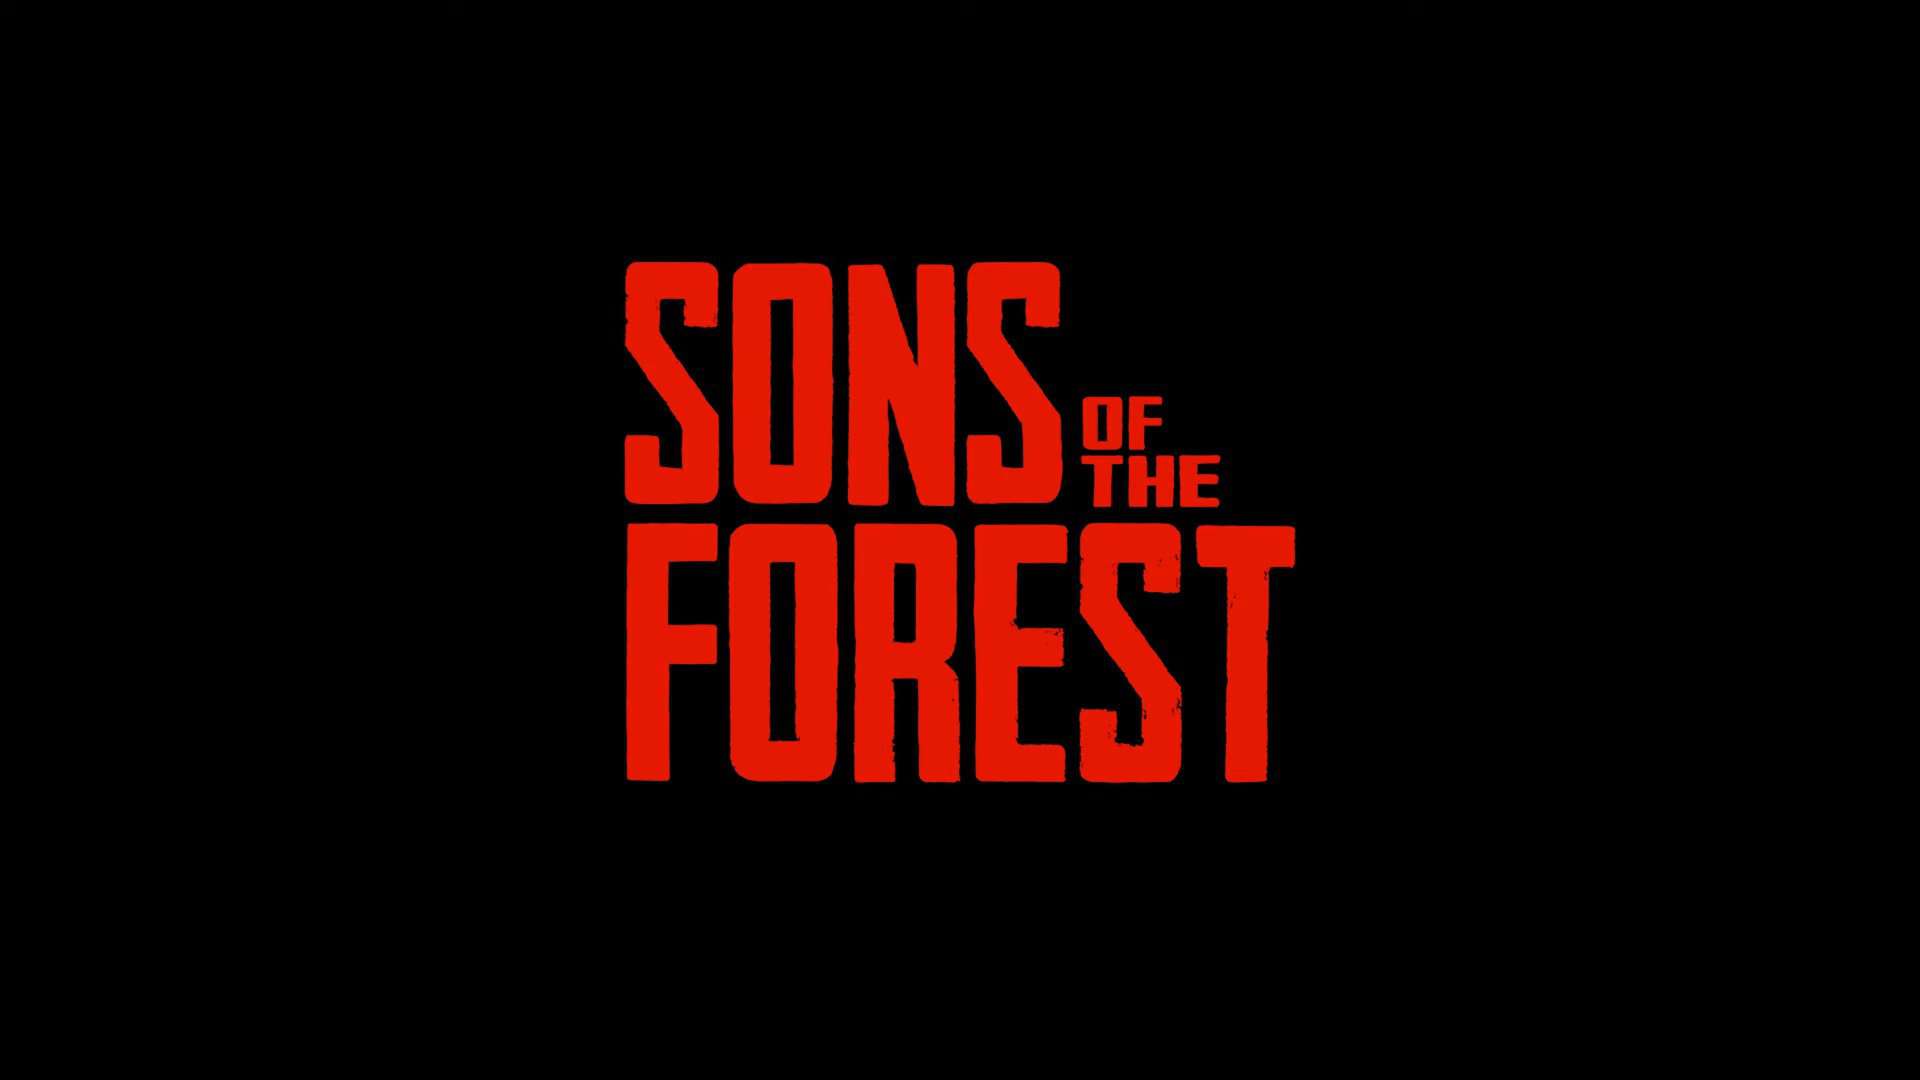 Best Steam Deck settings for Sons of the Forest - Video Games on